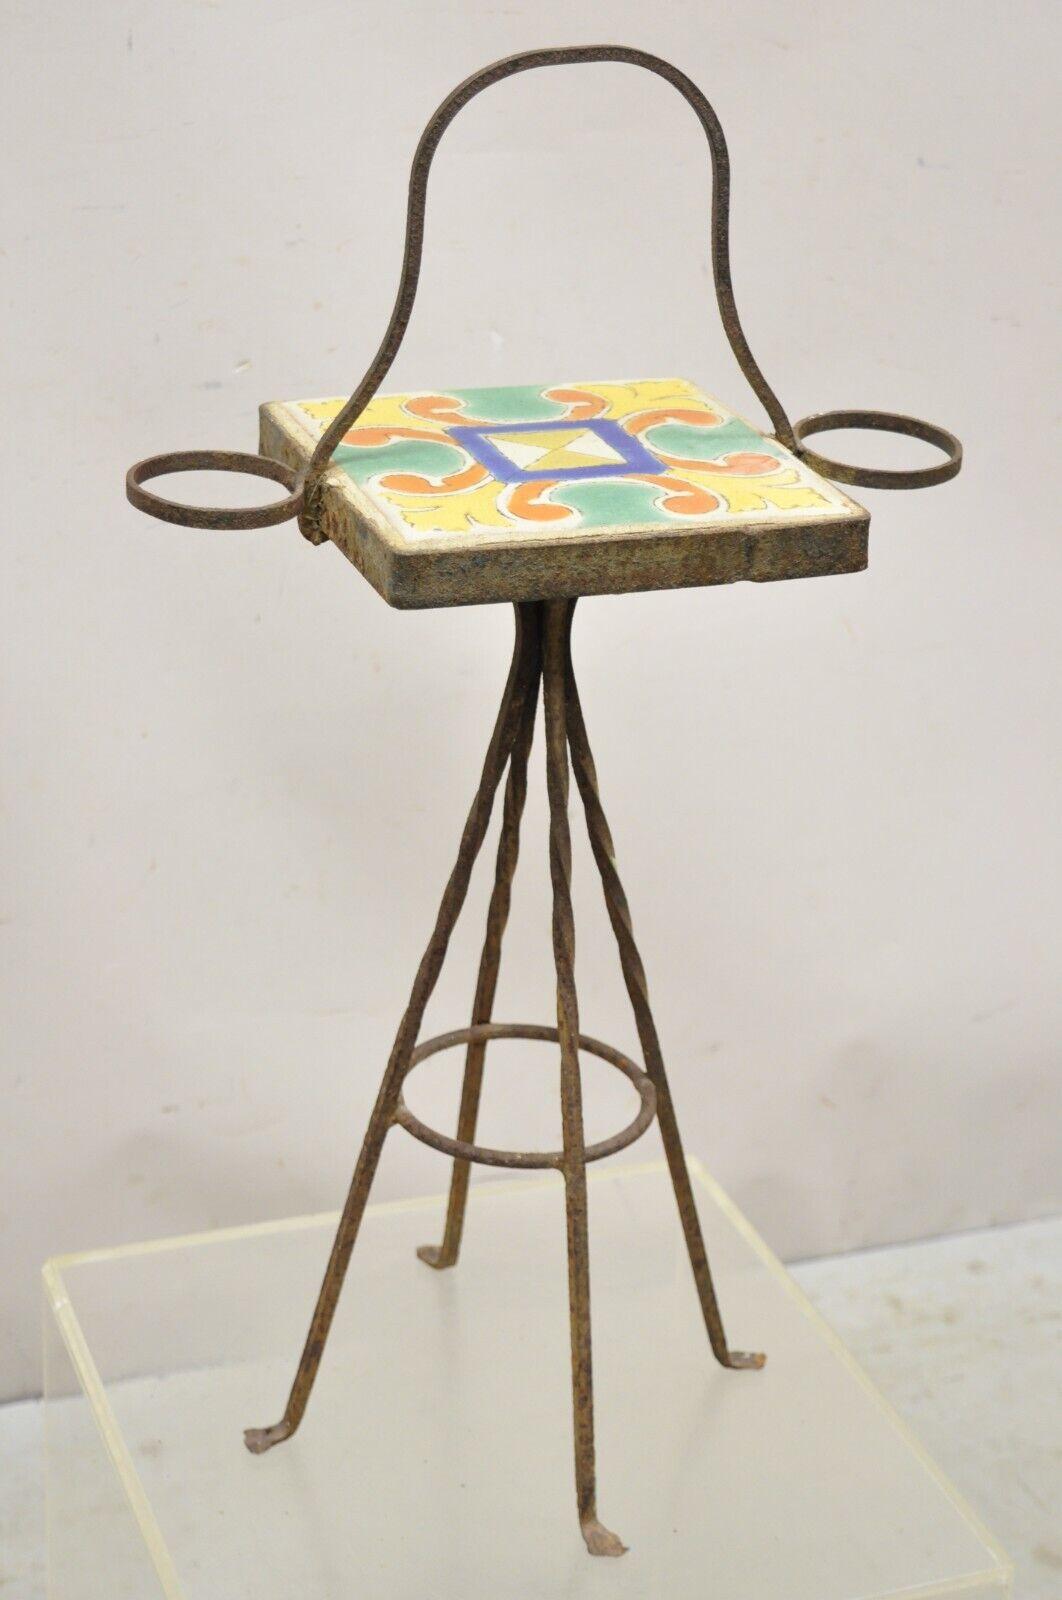 Antique Catalina California Arts & Crafts Tile Smoke Stand Small Side Table For Sale 4